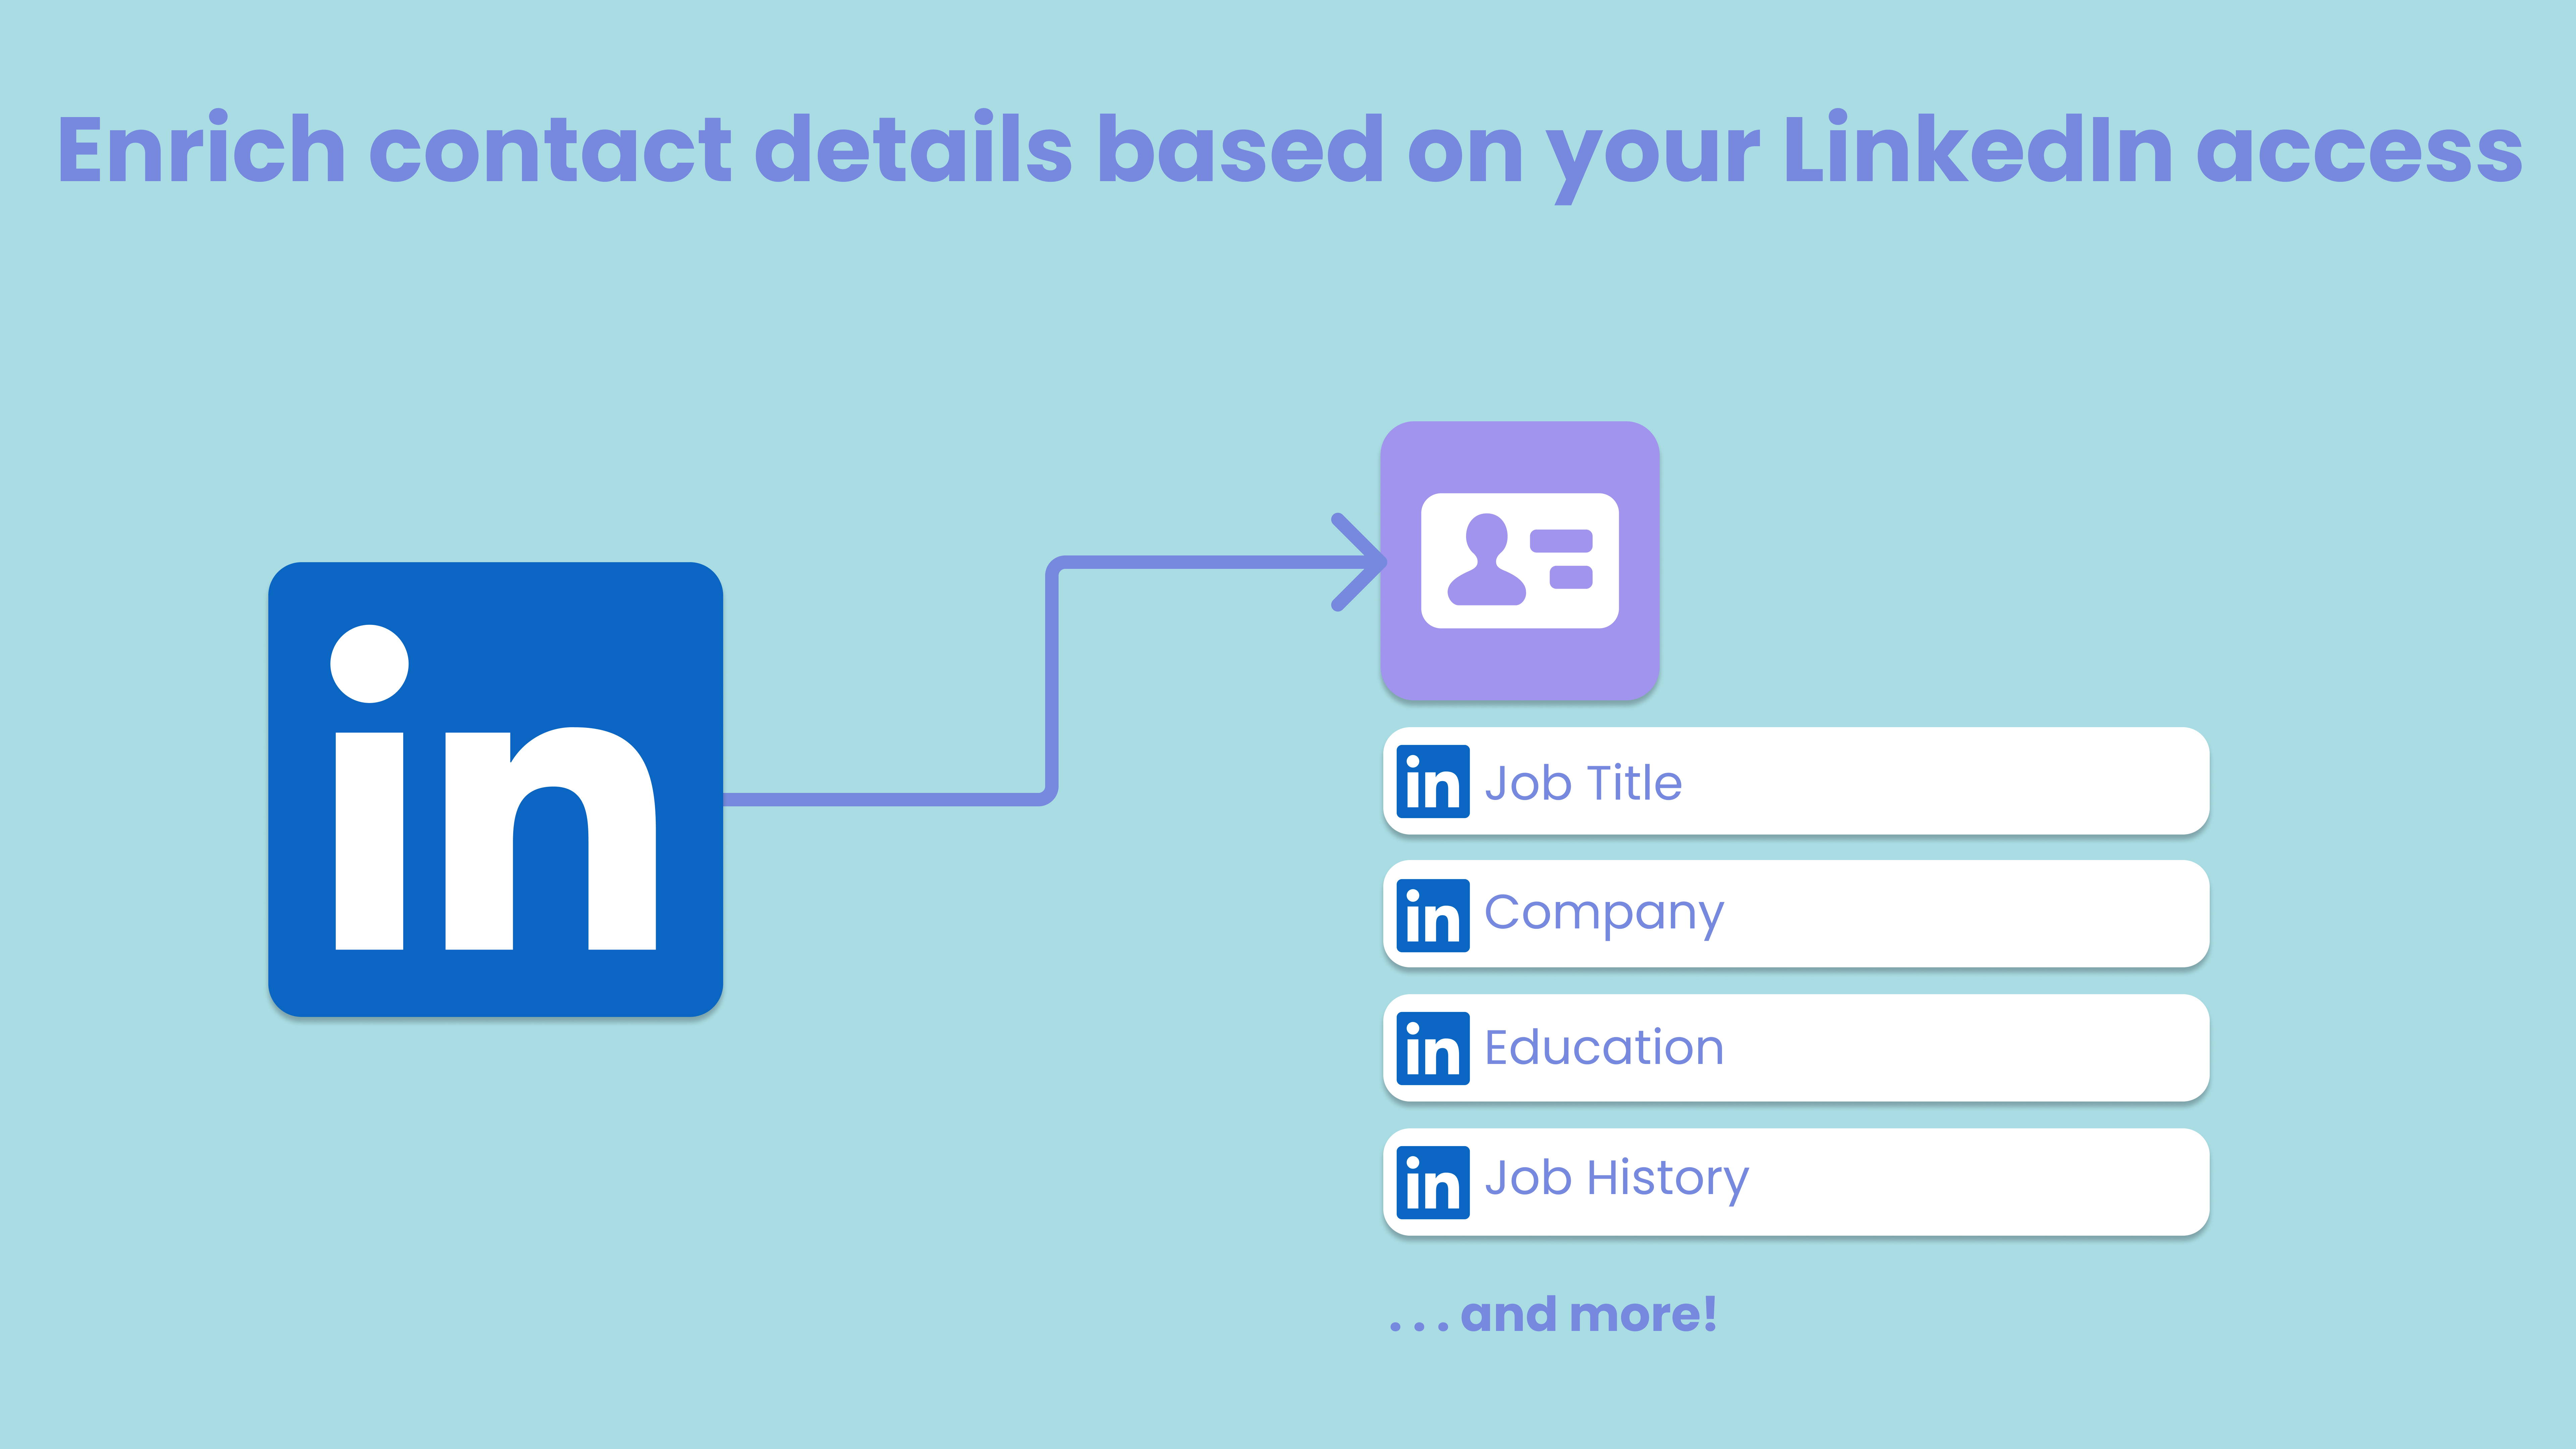 This image shows how Delpha can import data from LinkedIn into your Salesforce contacts.